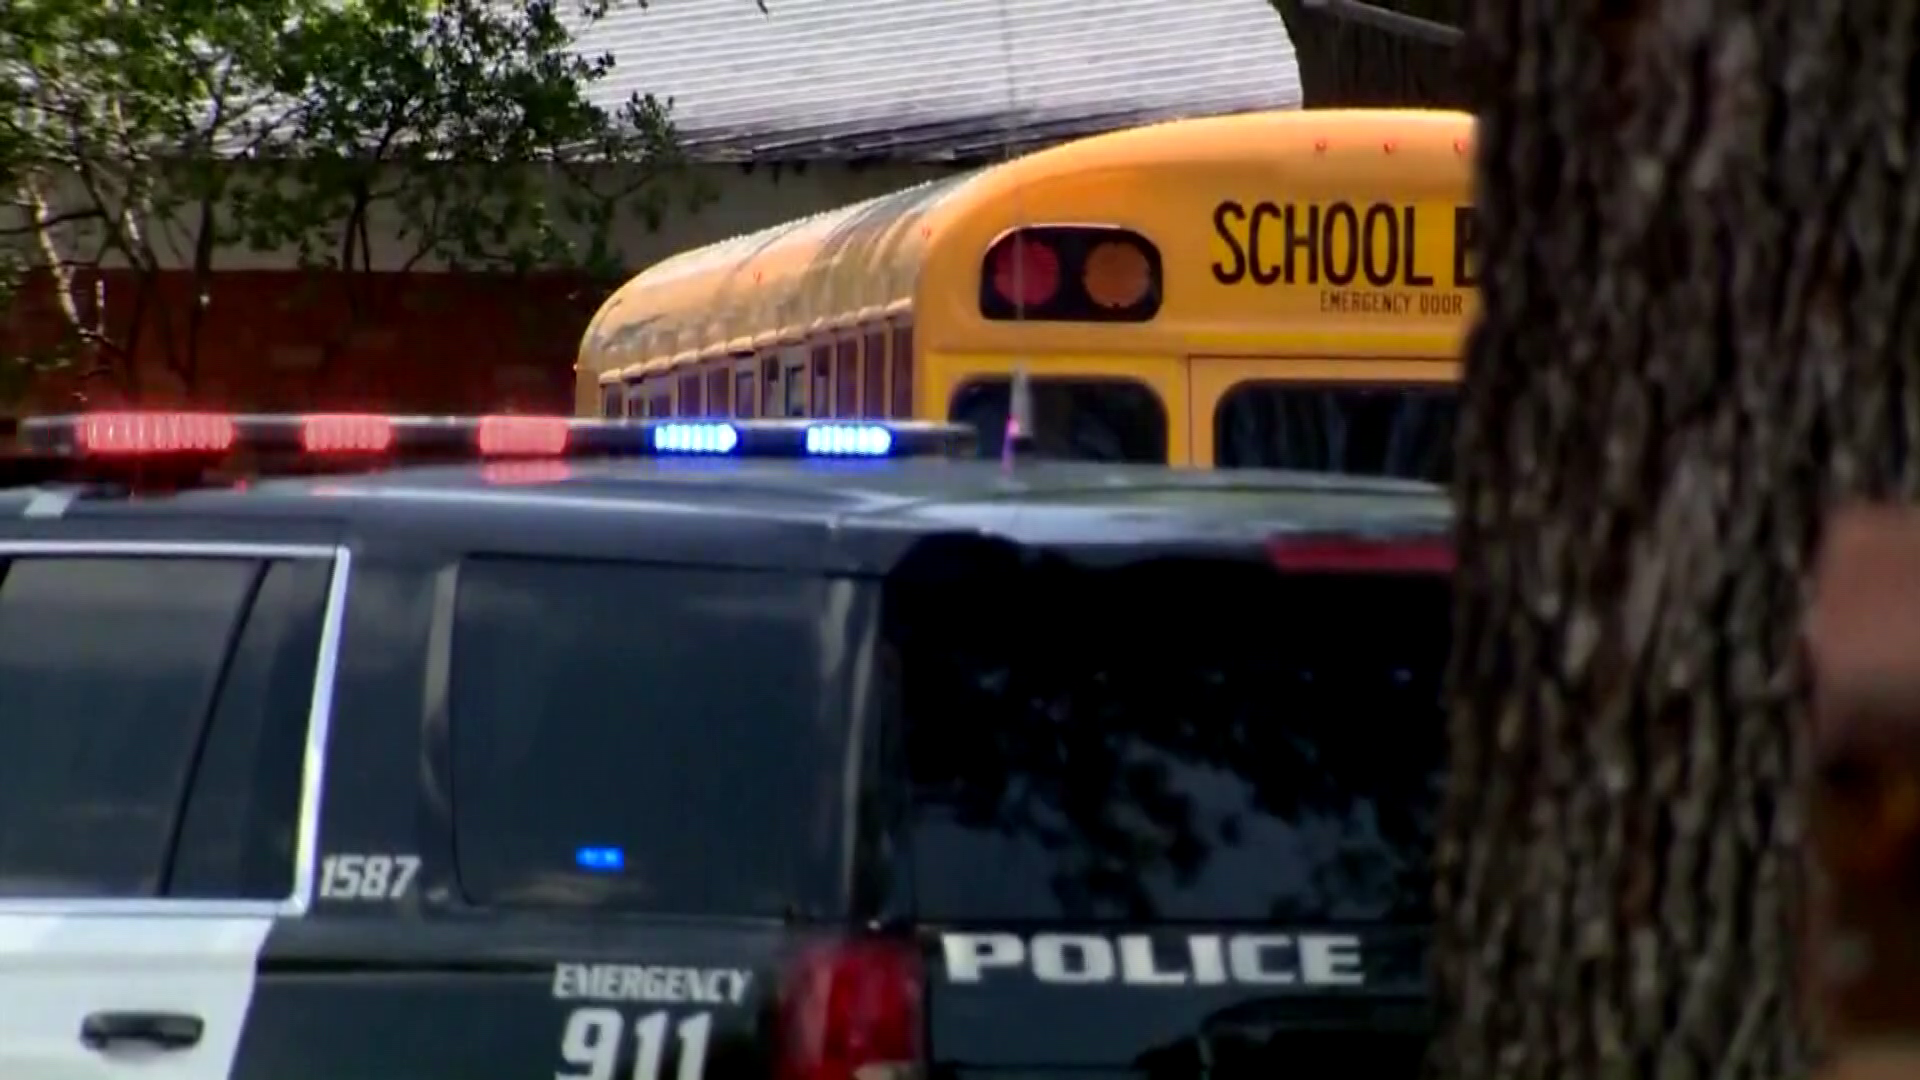 A new bill signed into Florida law implements additional school safety measures, with a focus on mental health and crisis intervention training, but some parents say it does not do enough to address what endangers children at school.